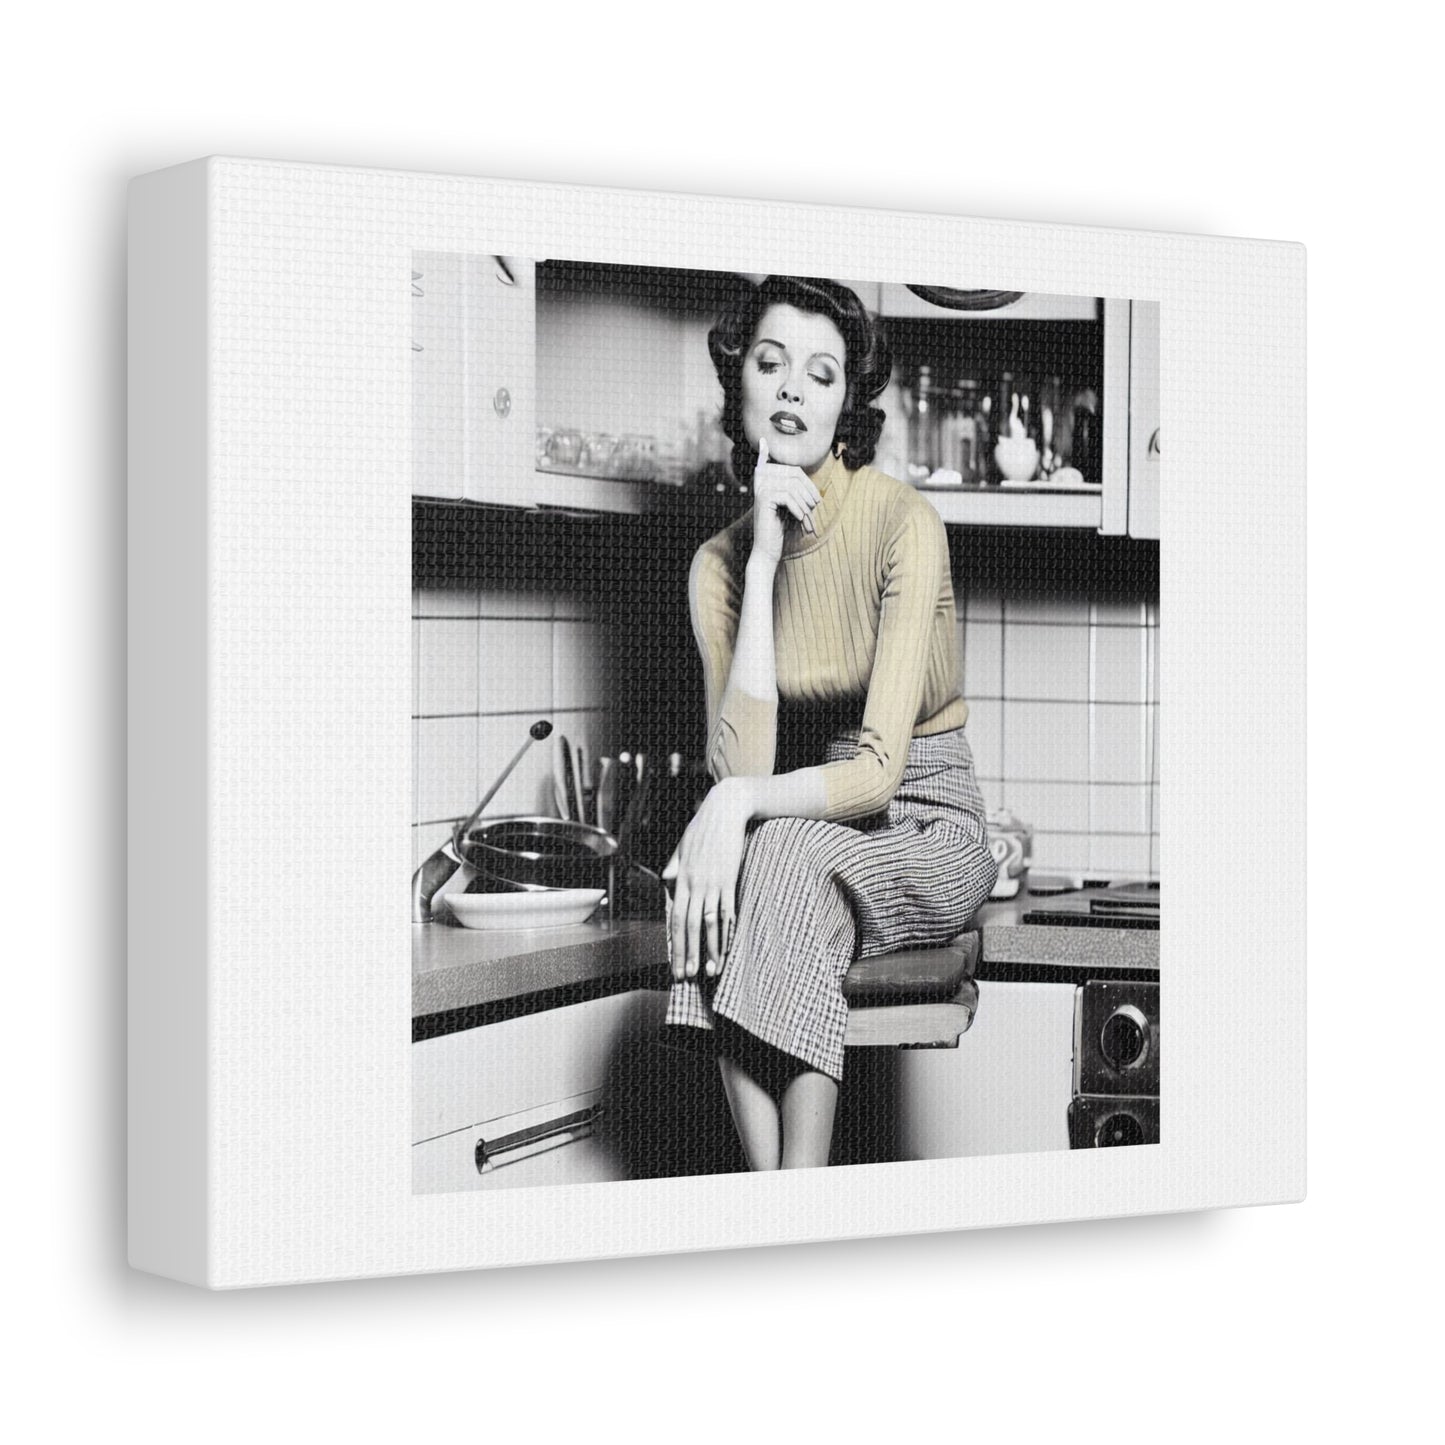 1960s Kitchen Sink Drama Woman Sitting On a Stool in the Kitchen 'Designed by AI' Art Print on Canvas